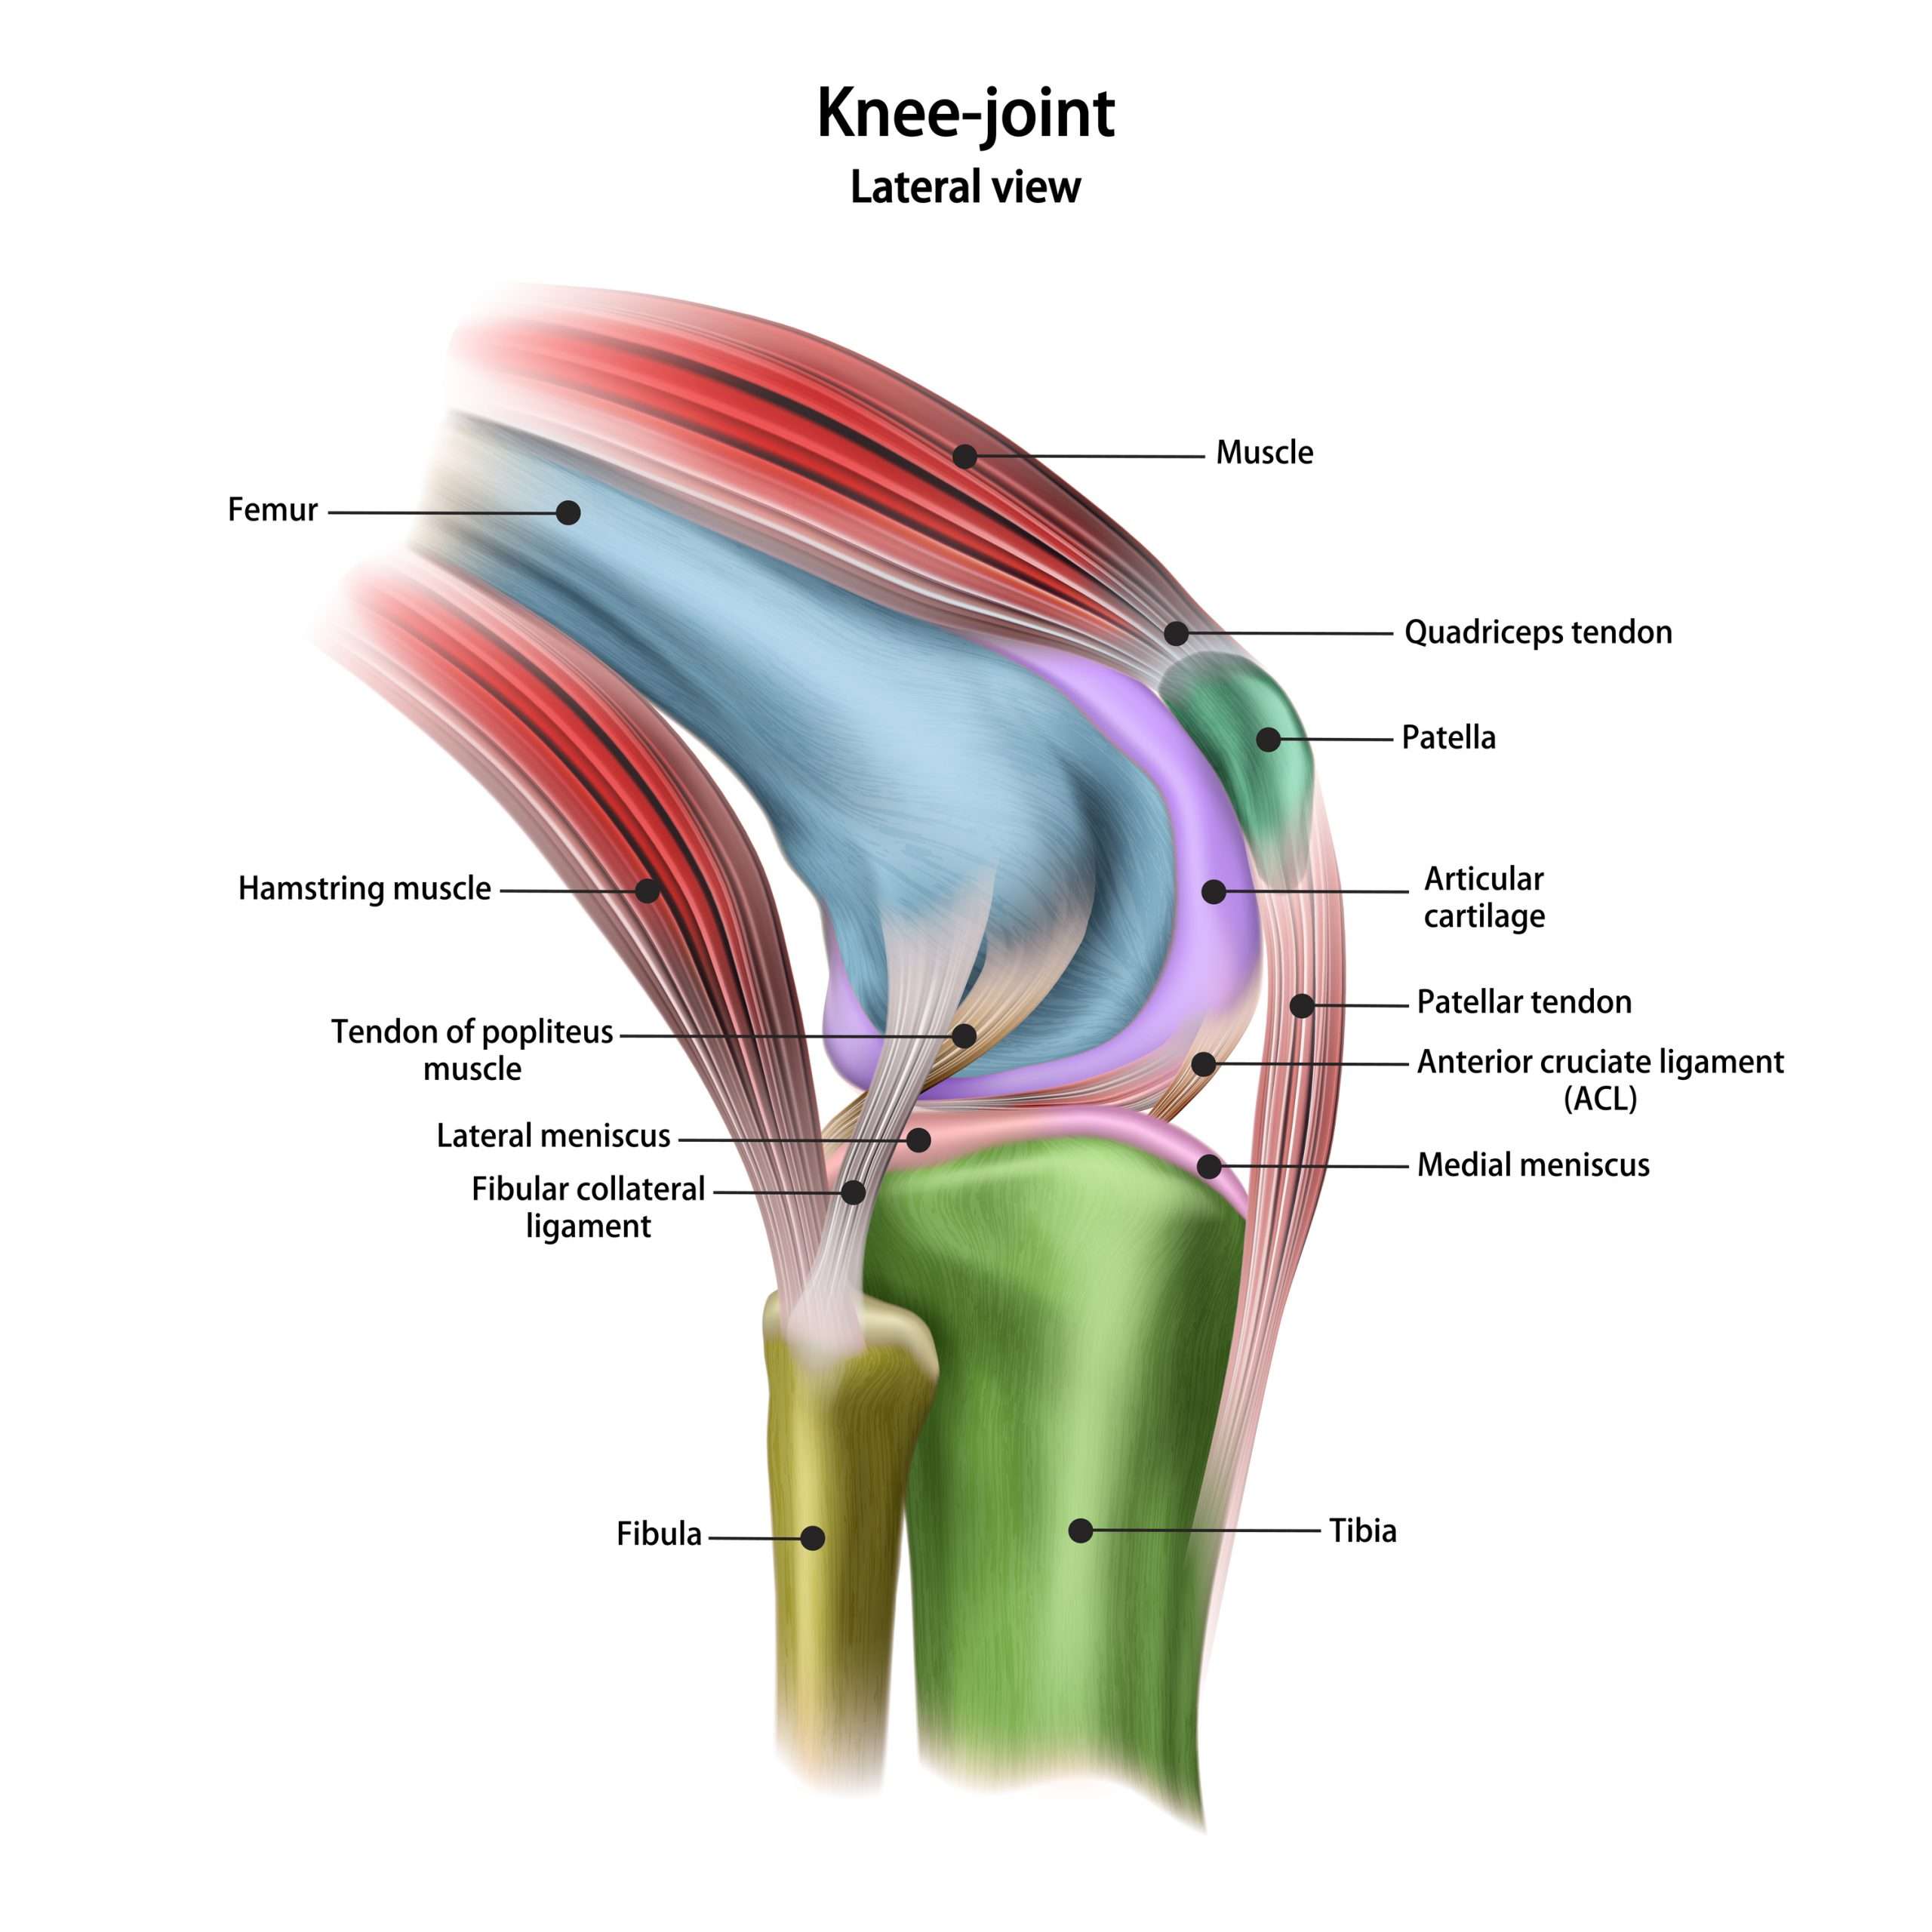 Does Physiotherapy Help Knee Pain?